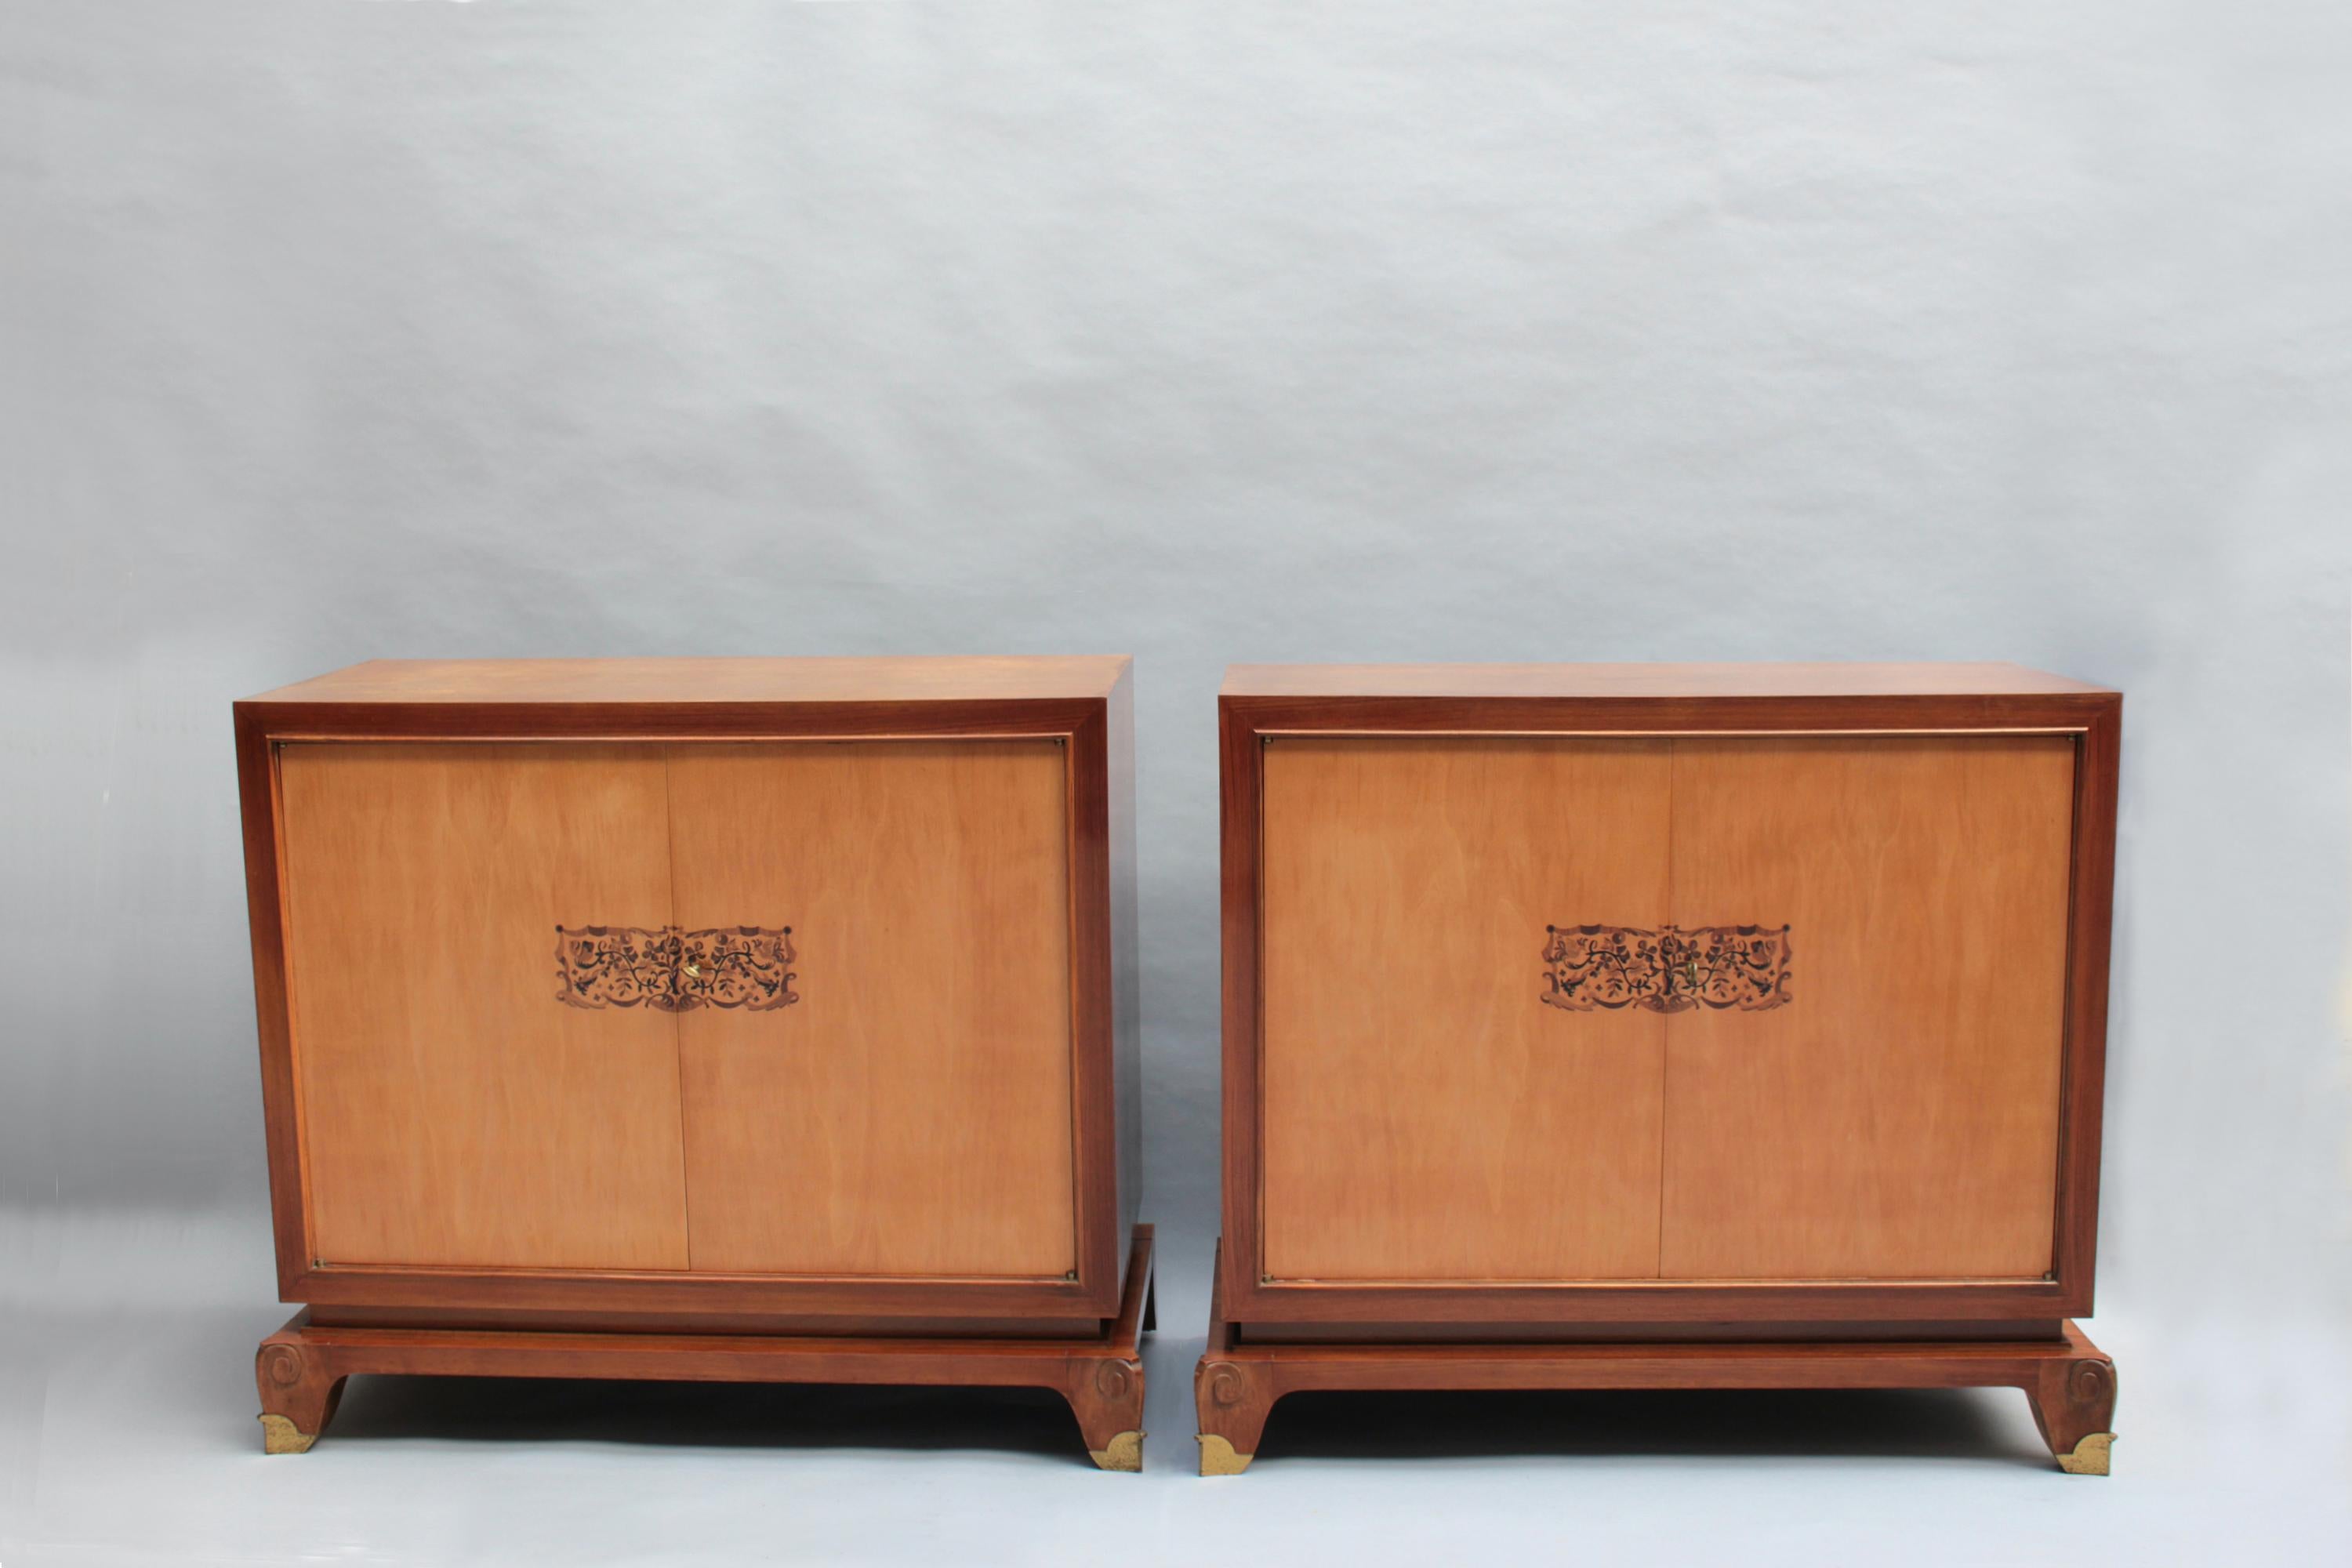 A Pair of Fine French Art Deco Rosewood Cabinets/Commodes by Jean Pascaud In Good Condition For Sale In Long Island City, NY